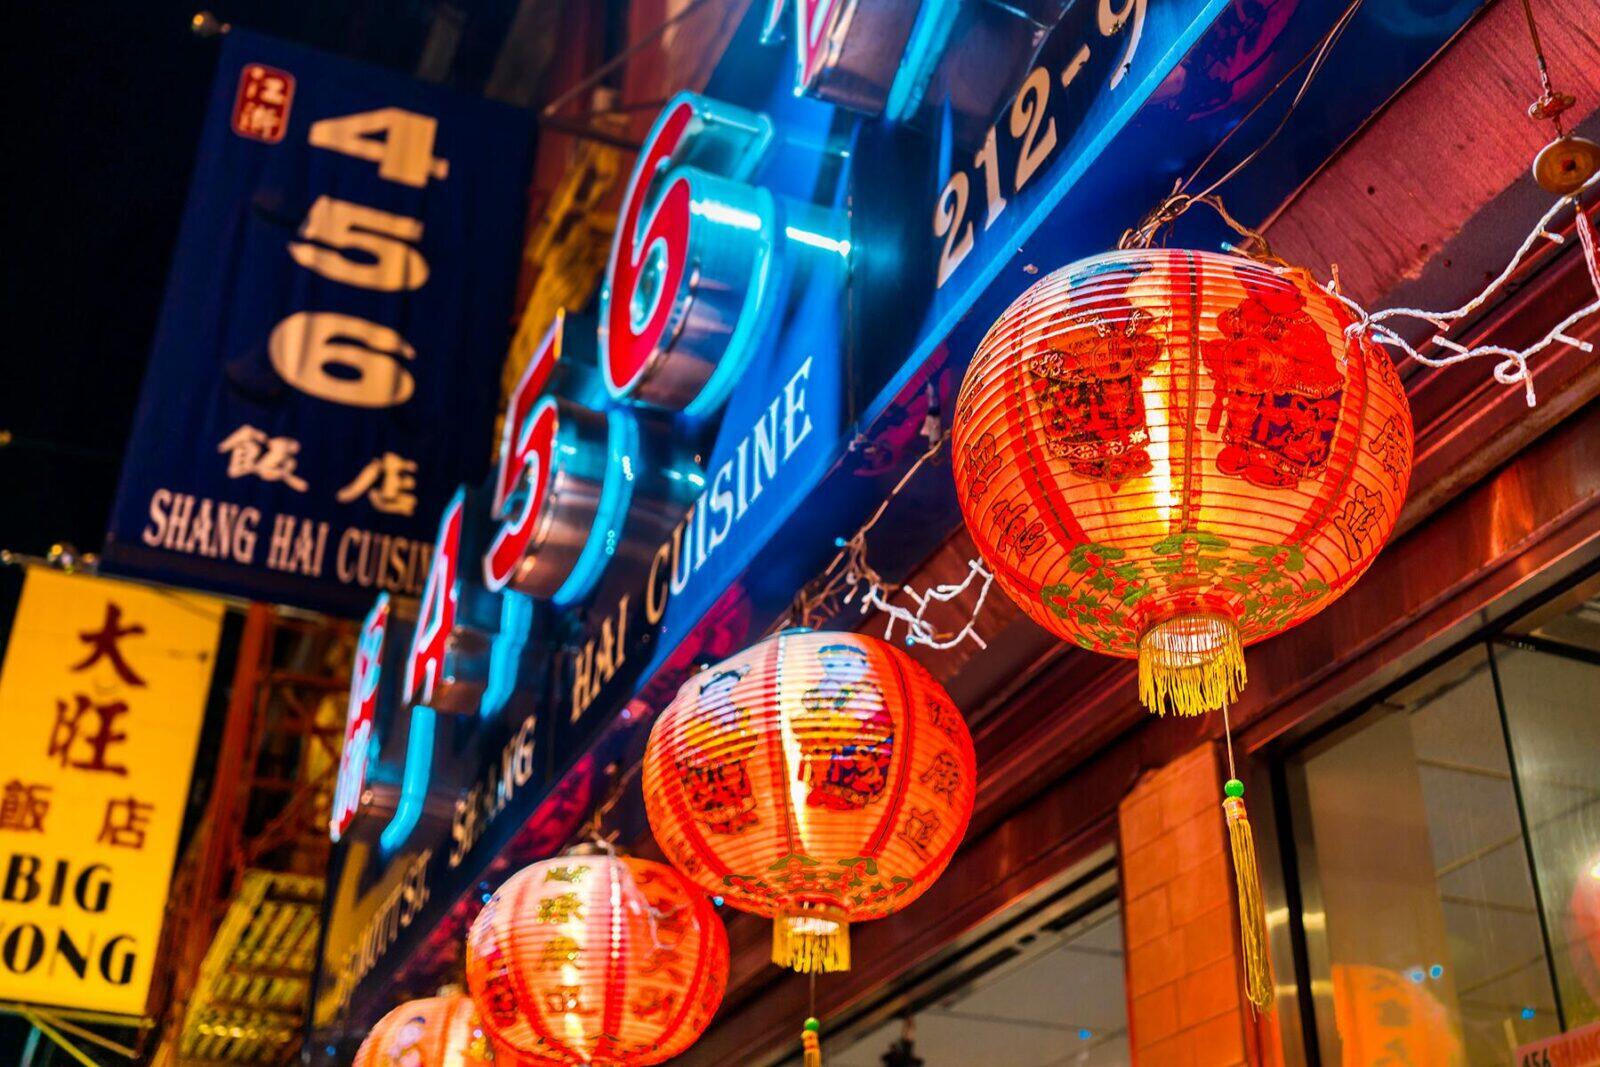 places to visit in chinatown nyc